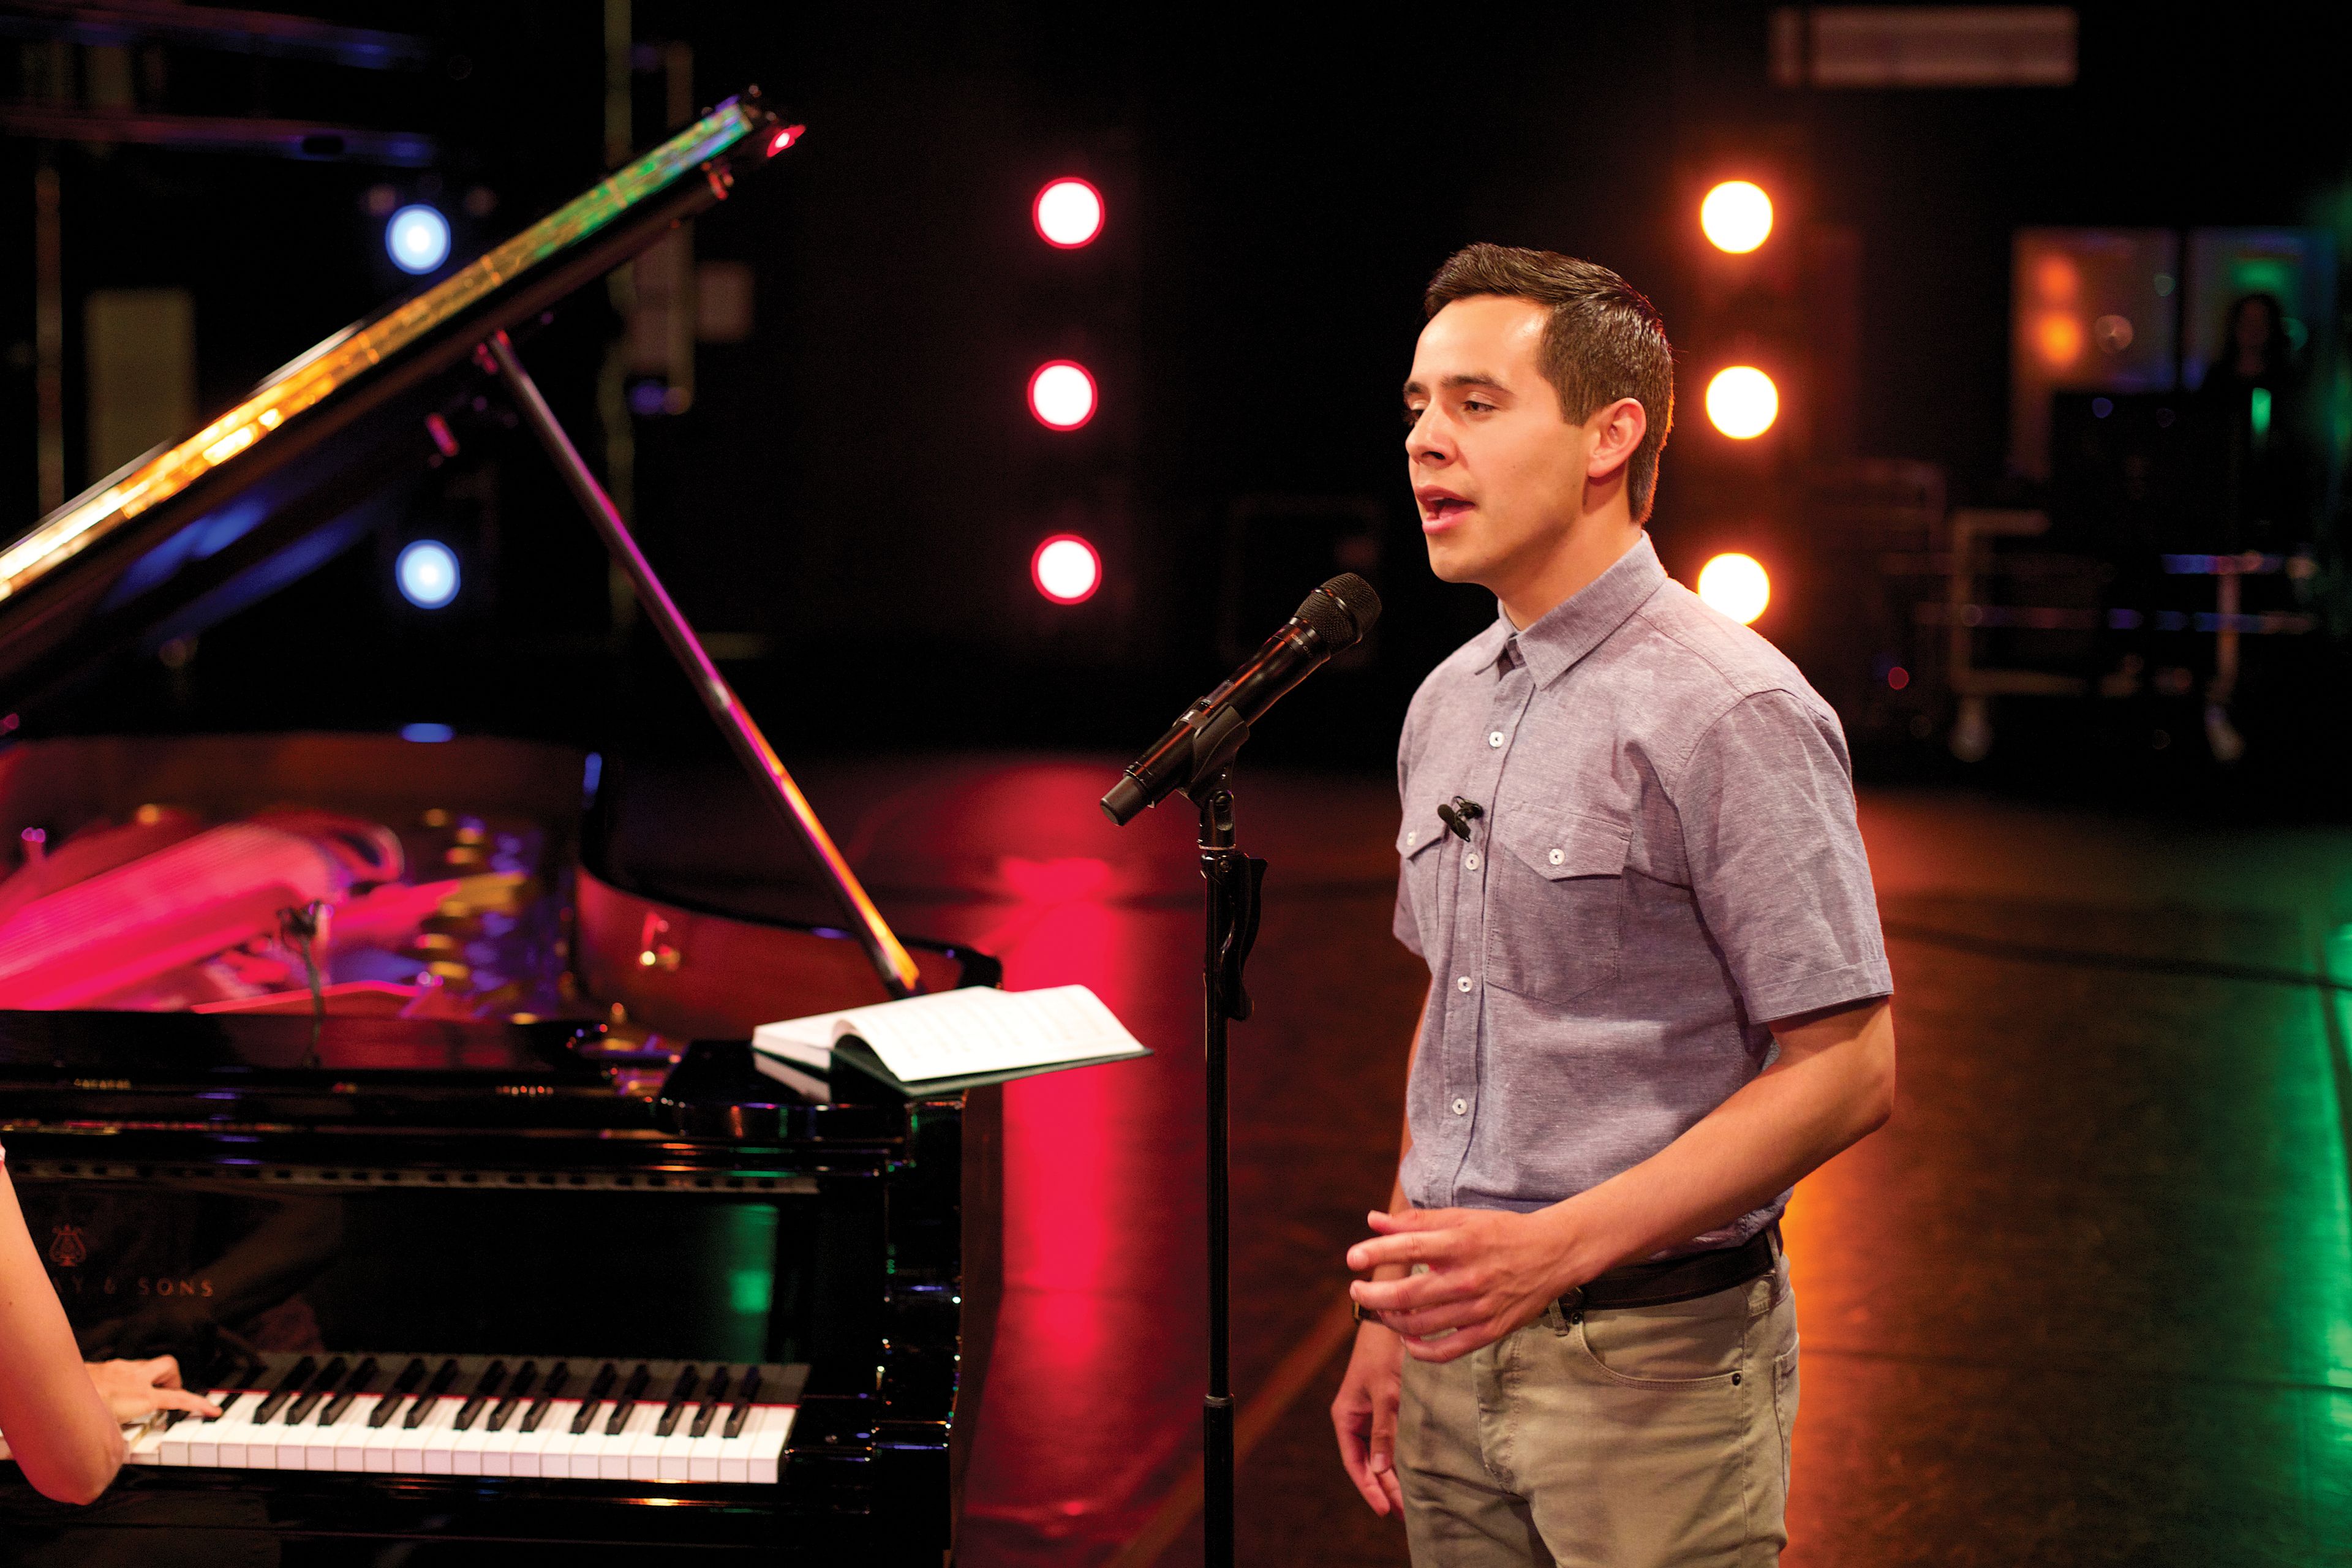 David Archuleta sings while standing next to a piano.